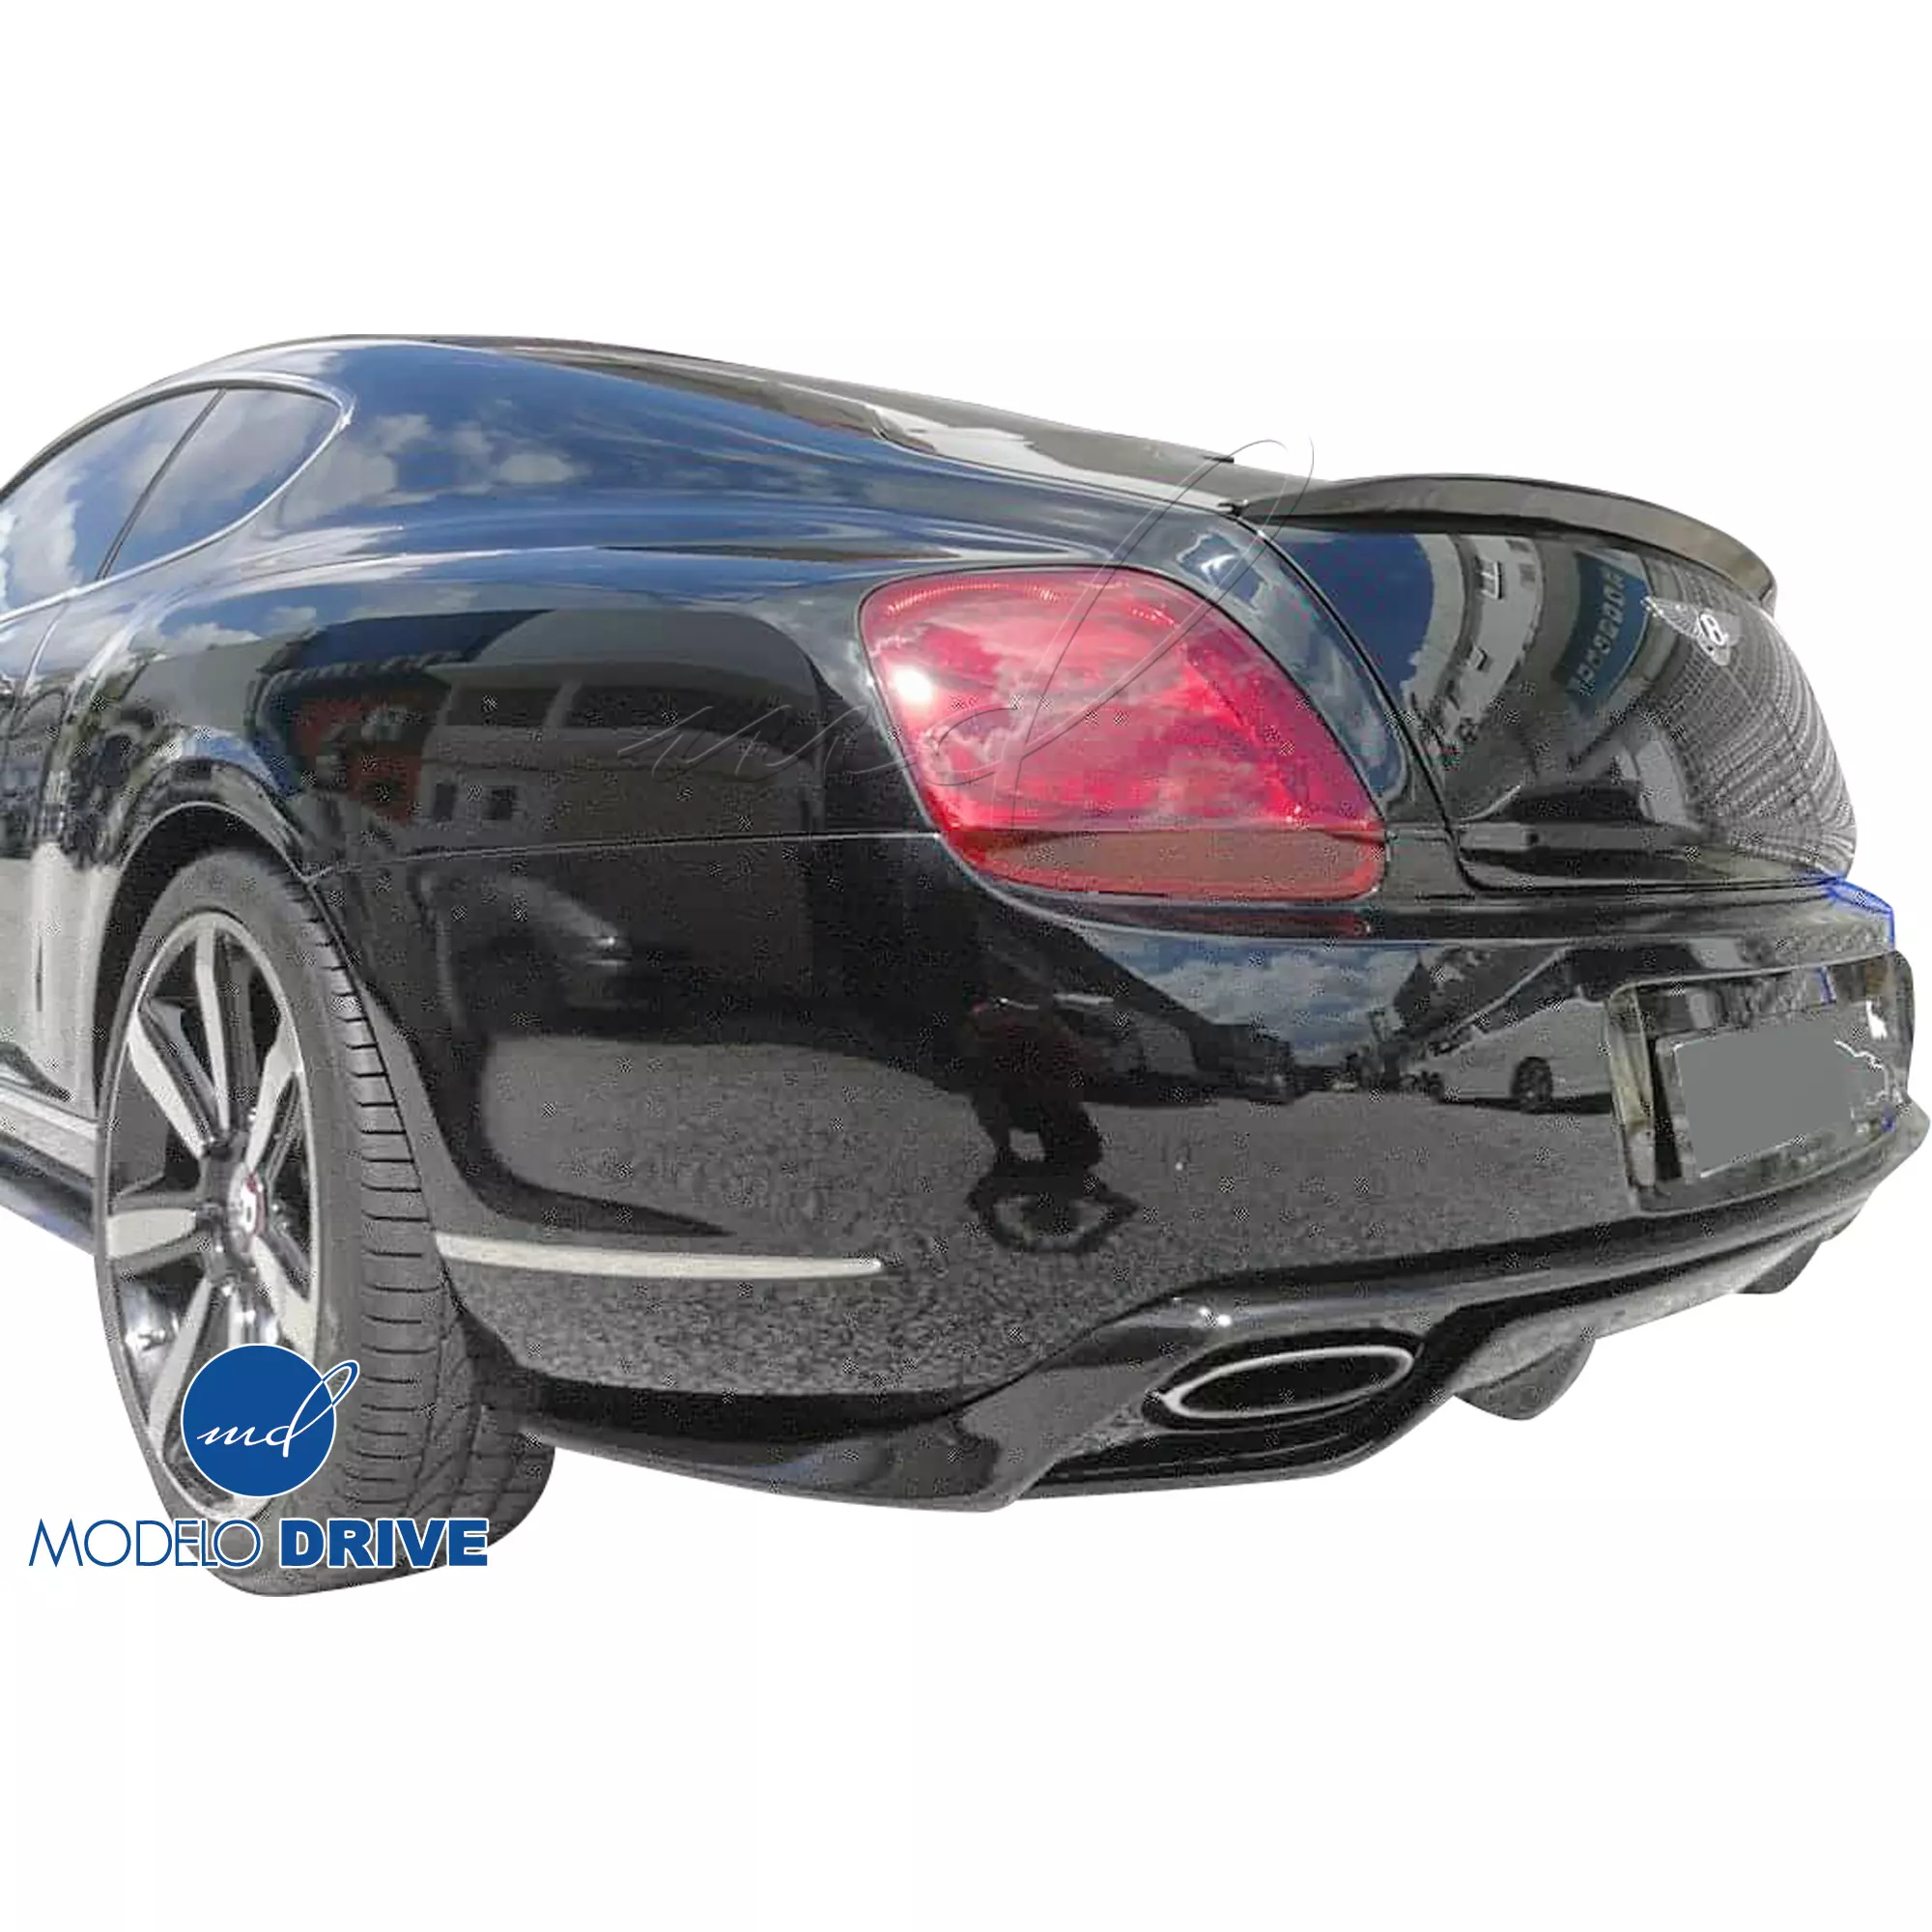 ModeloDrive Carbon Fiber MULL Rear Diffuser > Bentley Continental GT GTC 2011-2018 > 2dr Coupe - Image 12